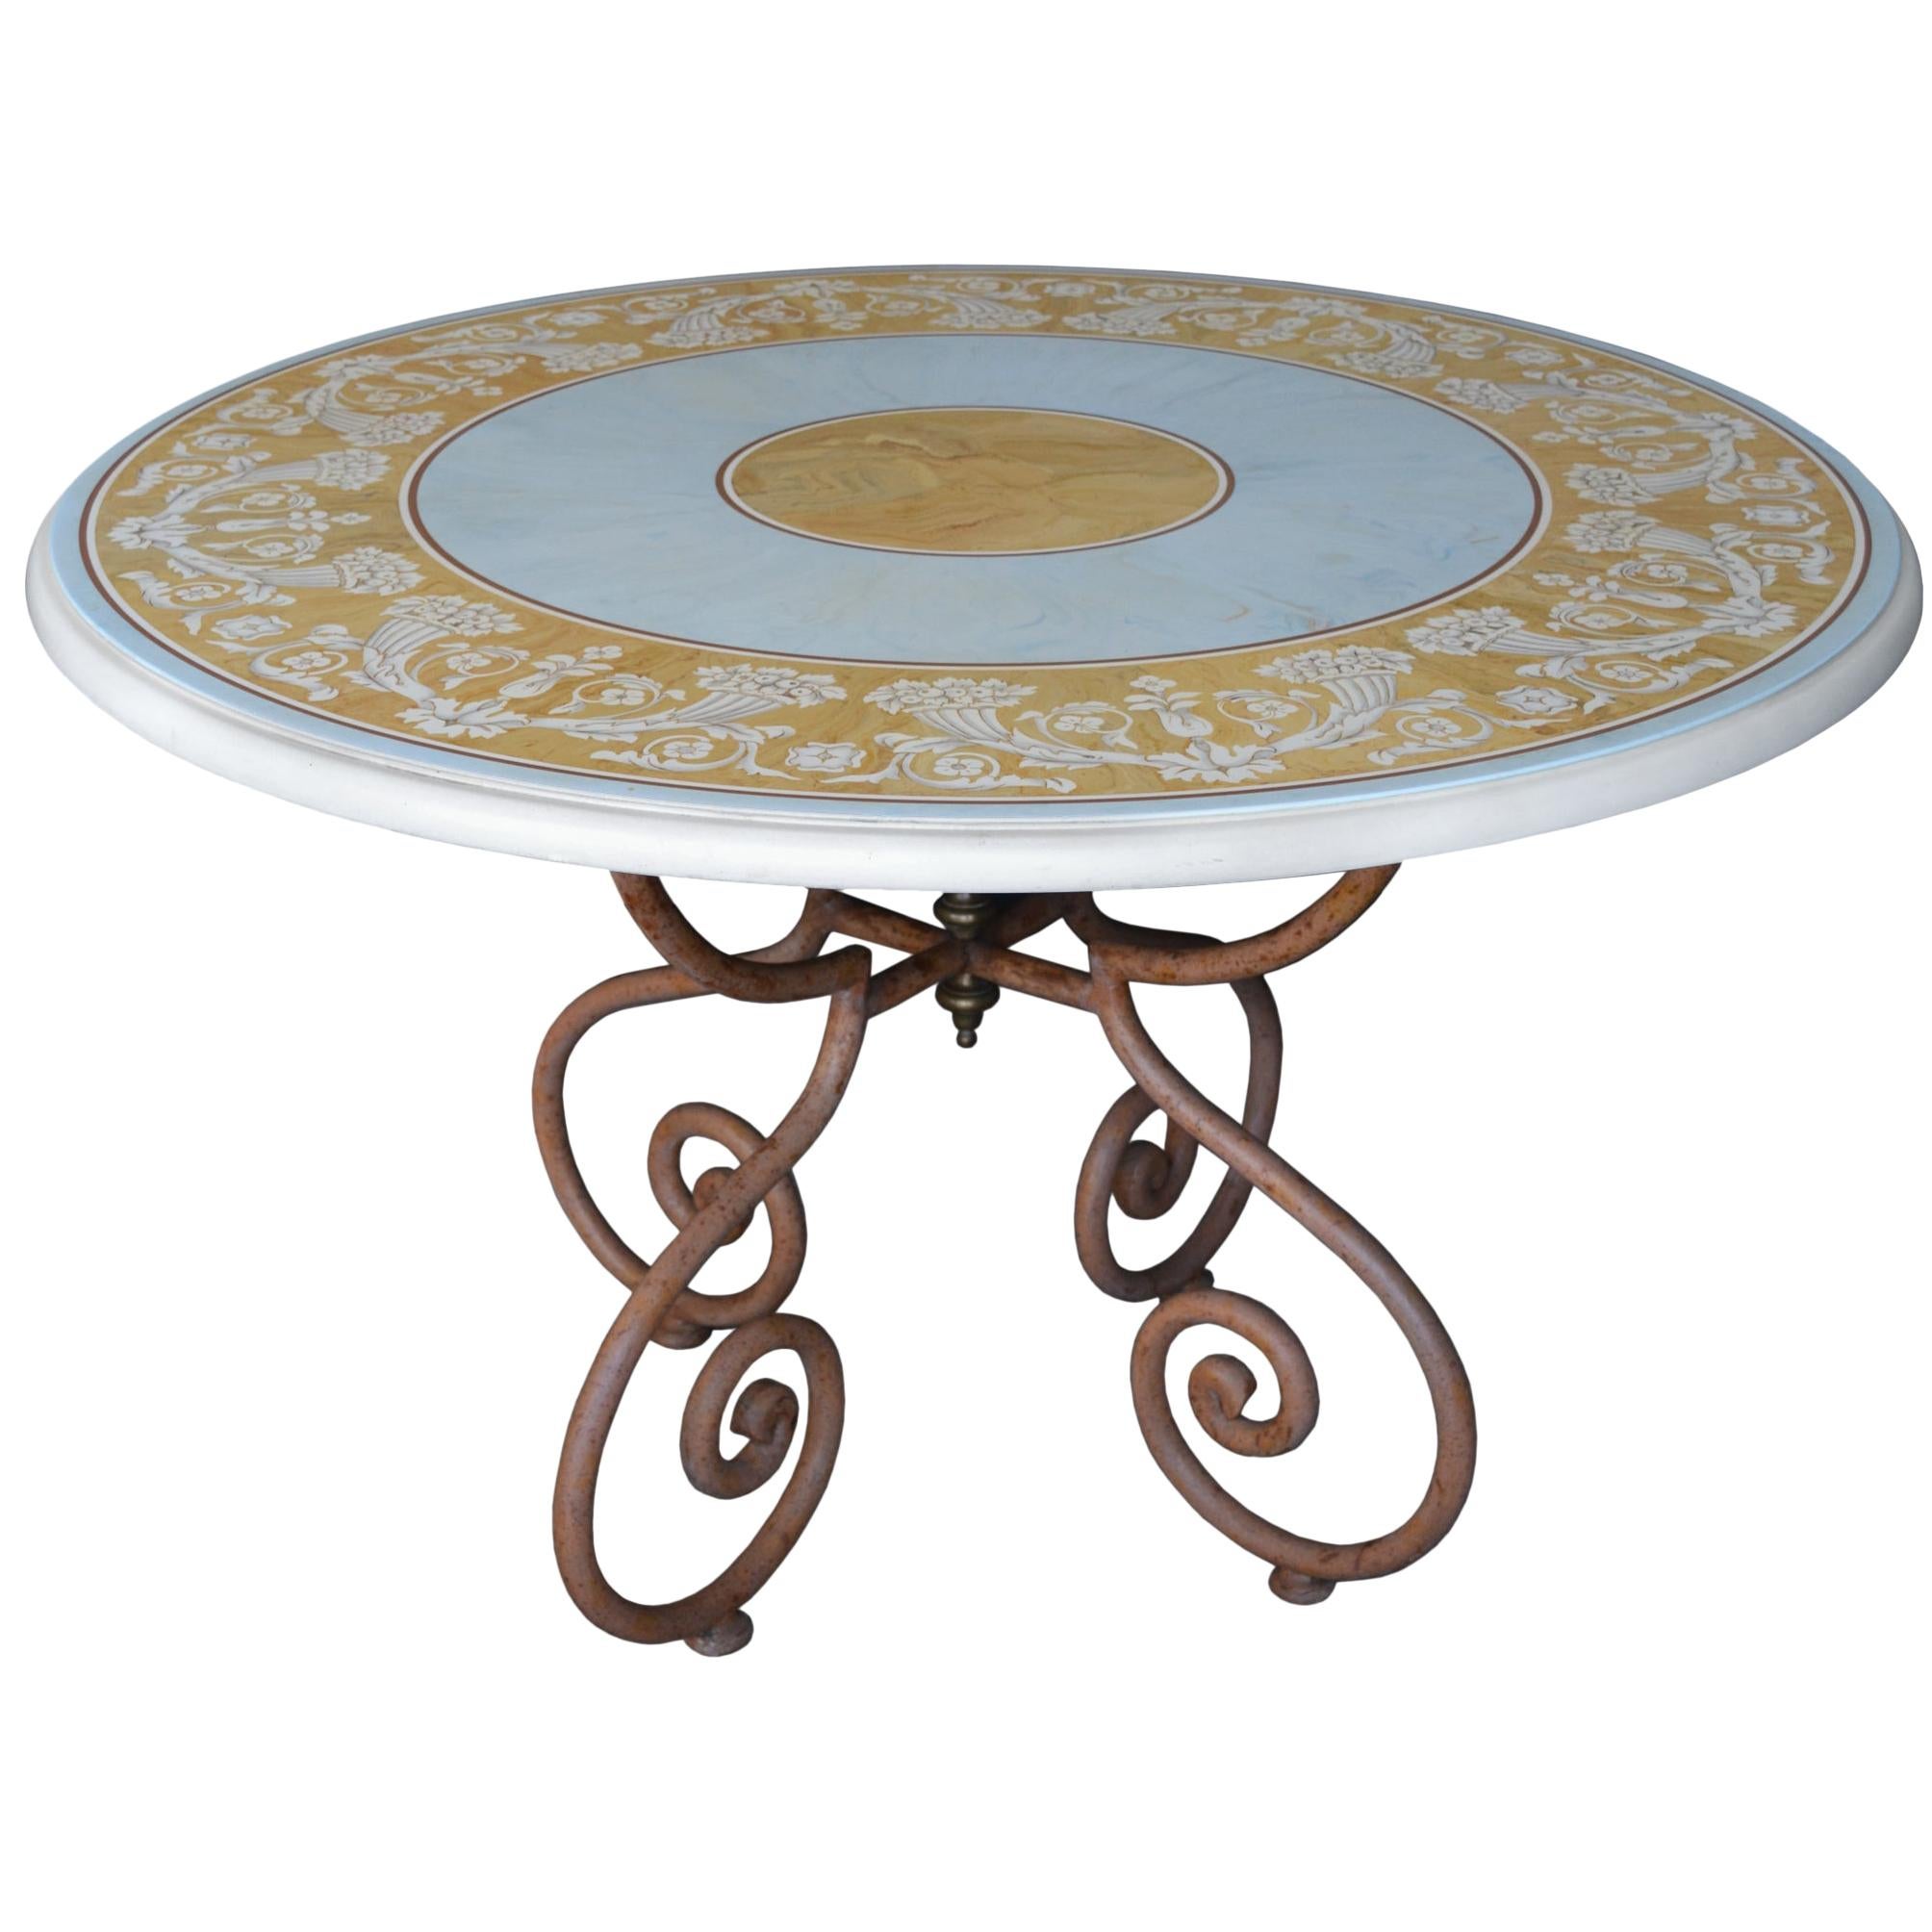 Round Classic Dining Table light blue Scagliola Art Inlay Wrought Iron Base